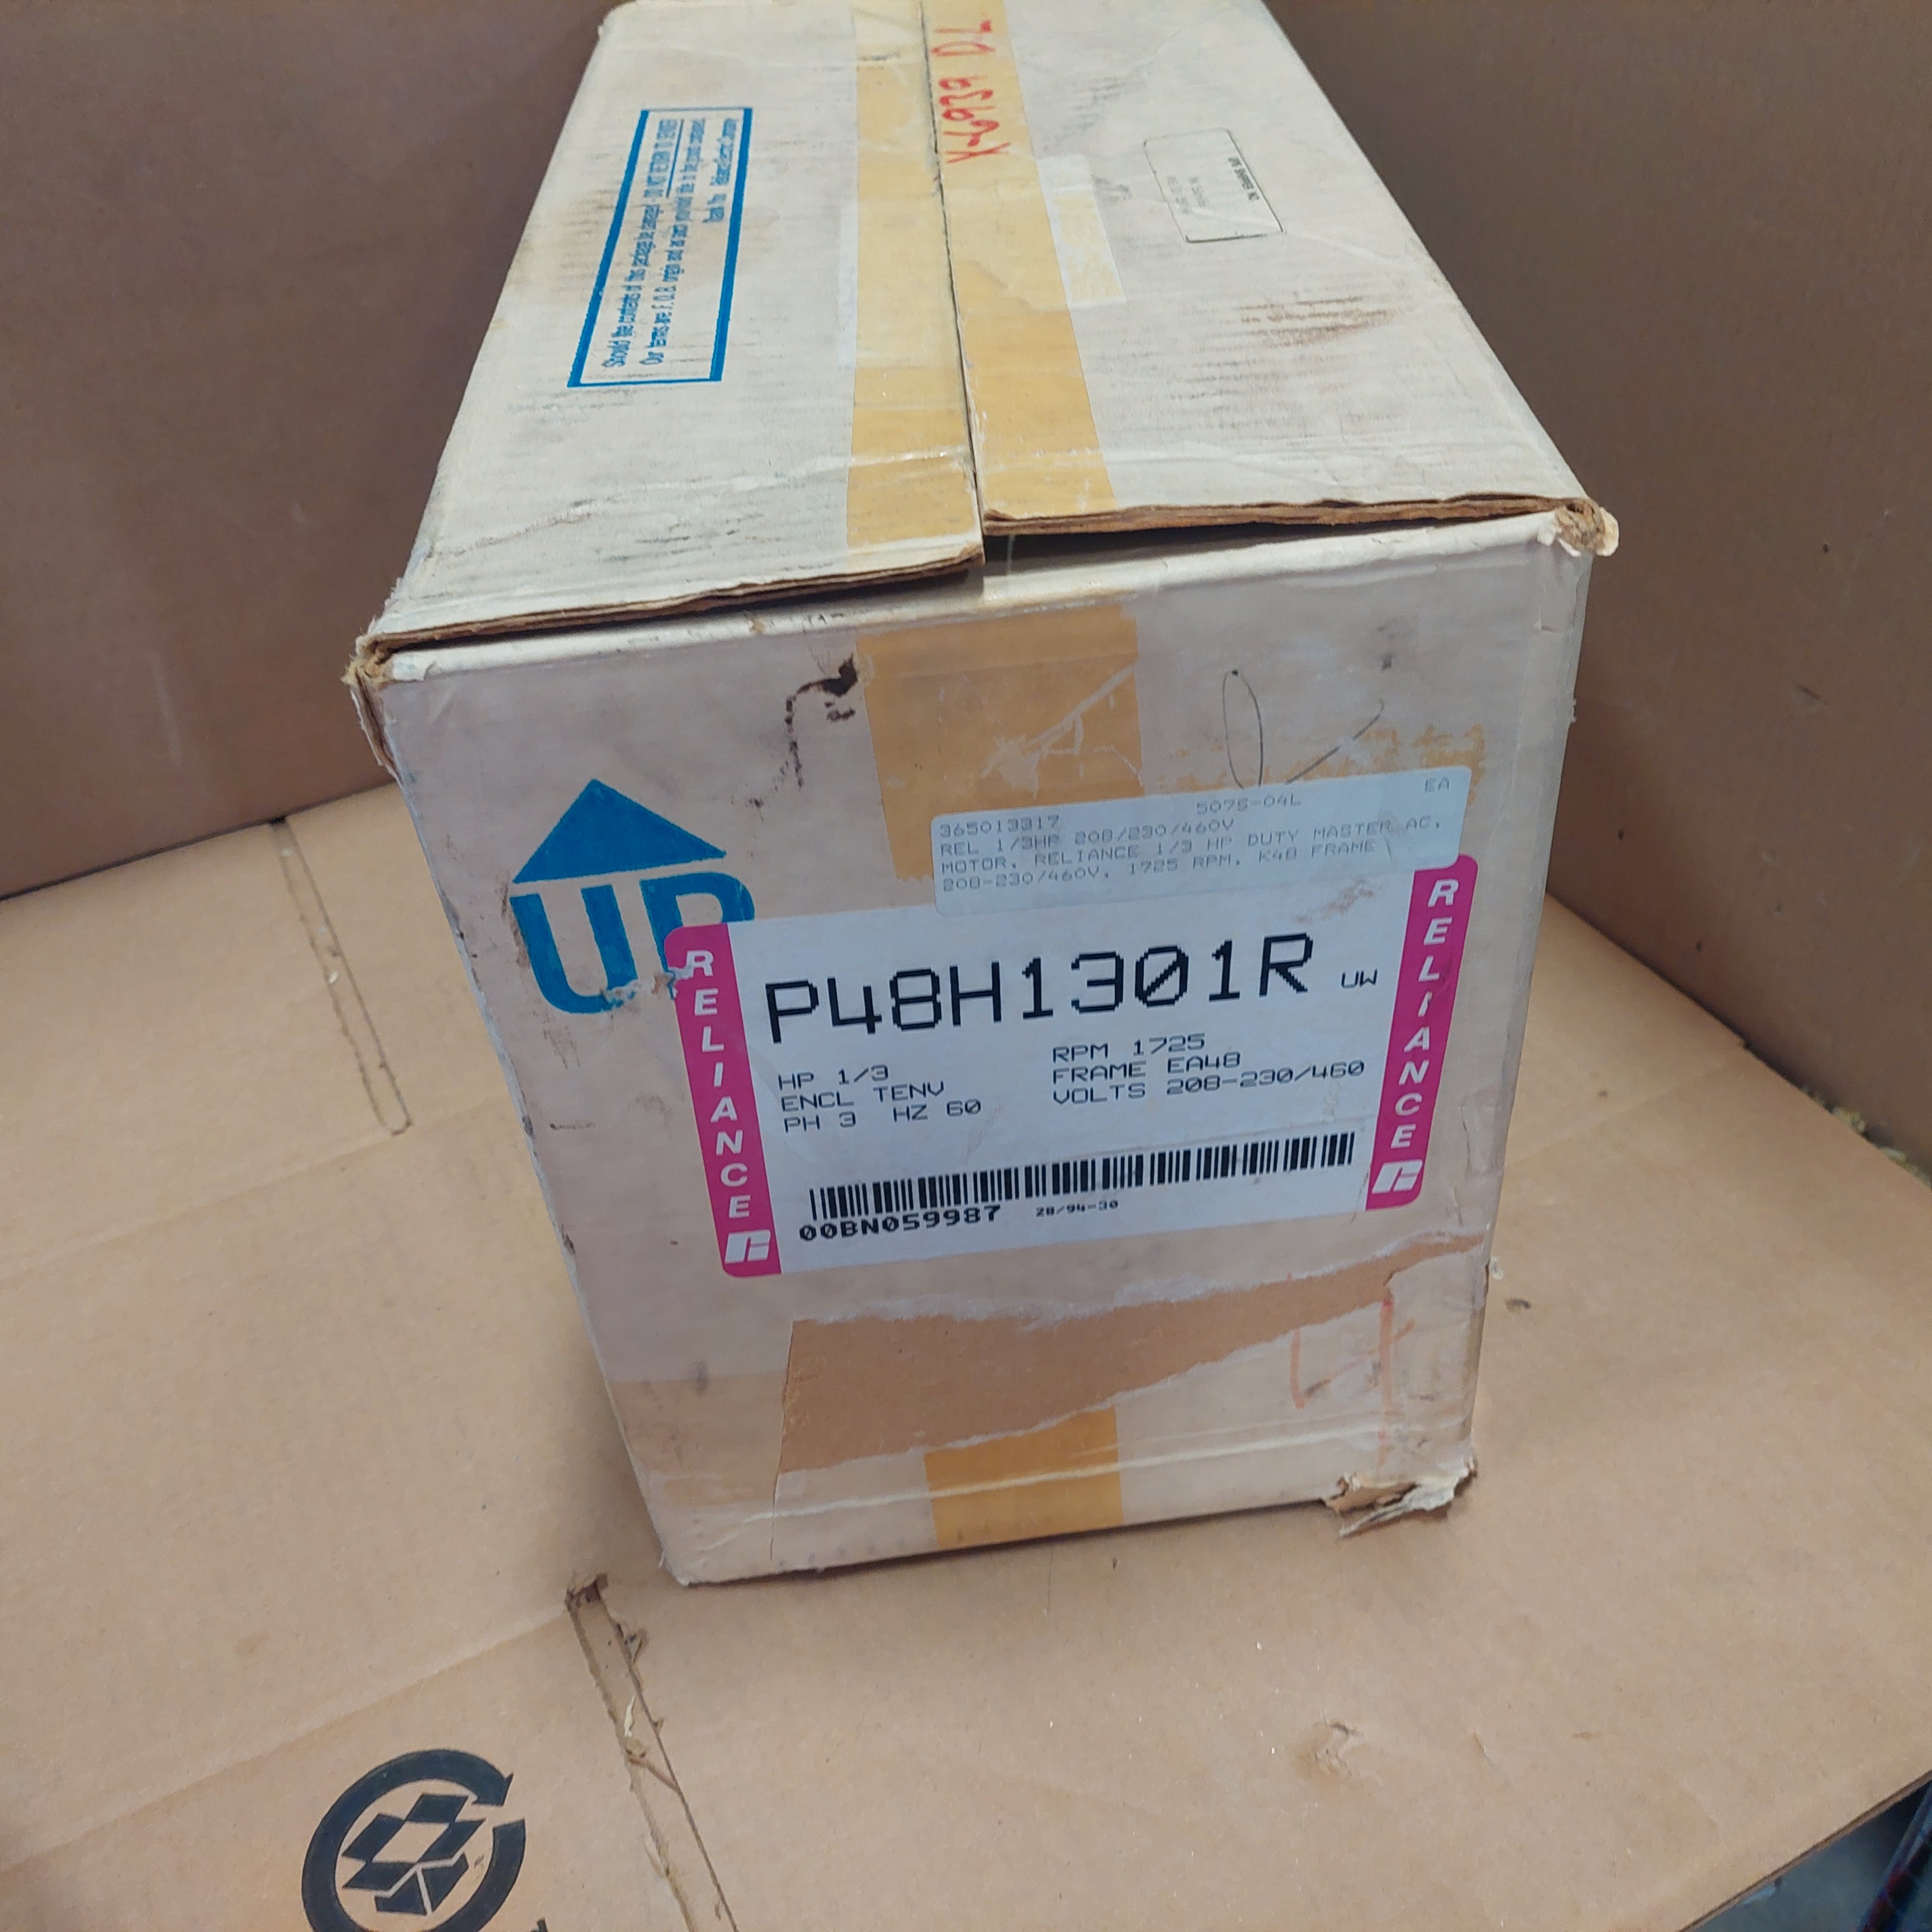 Reliance Electric P48H1301 R-UW .33 HP 1725 RPM 208/230V/460 3 PH EA48 New